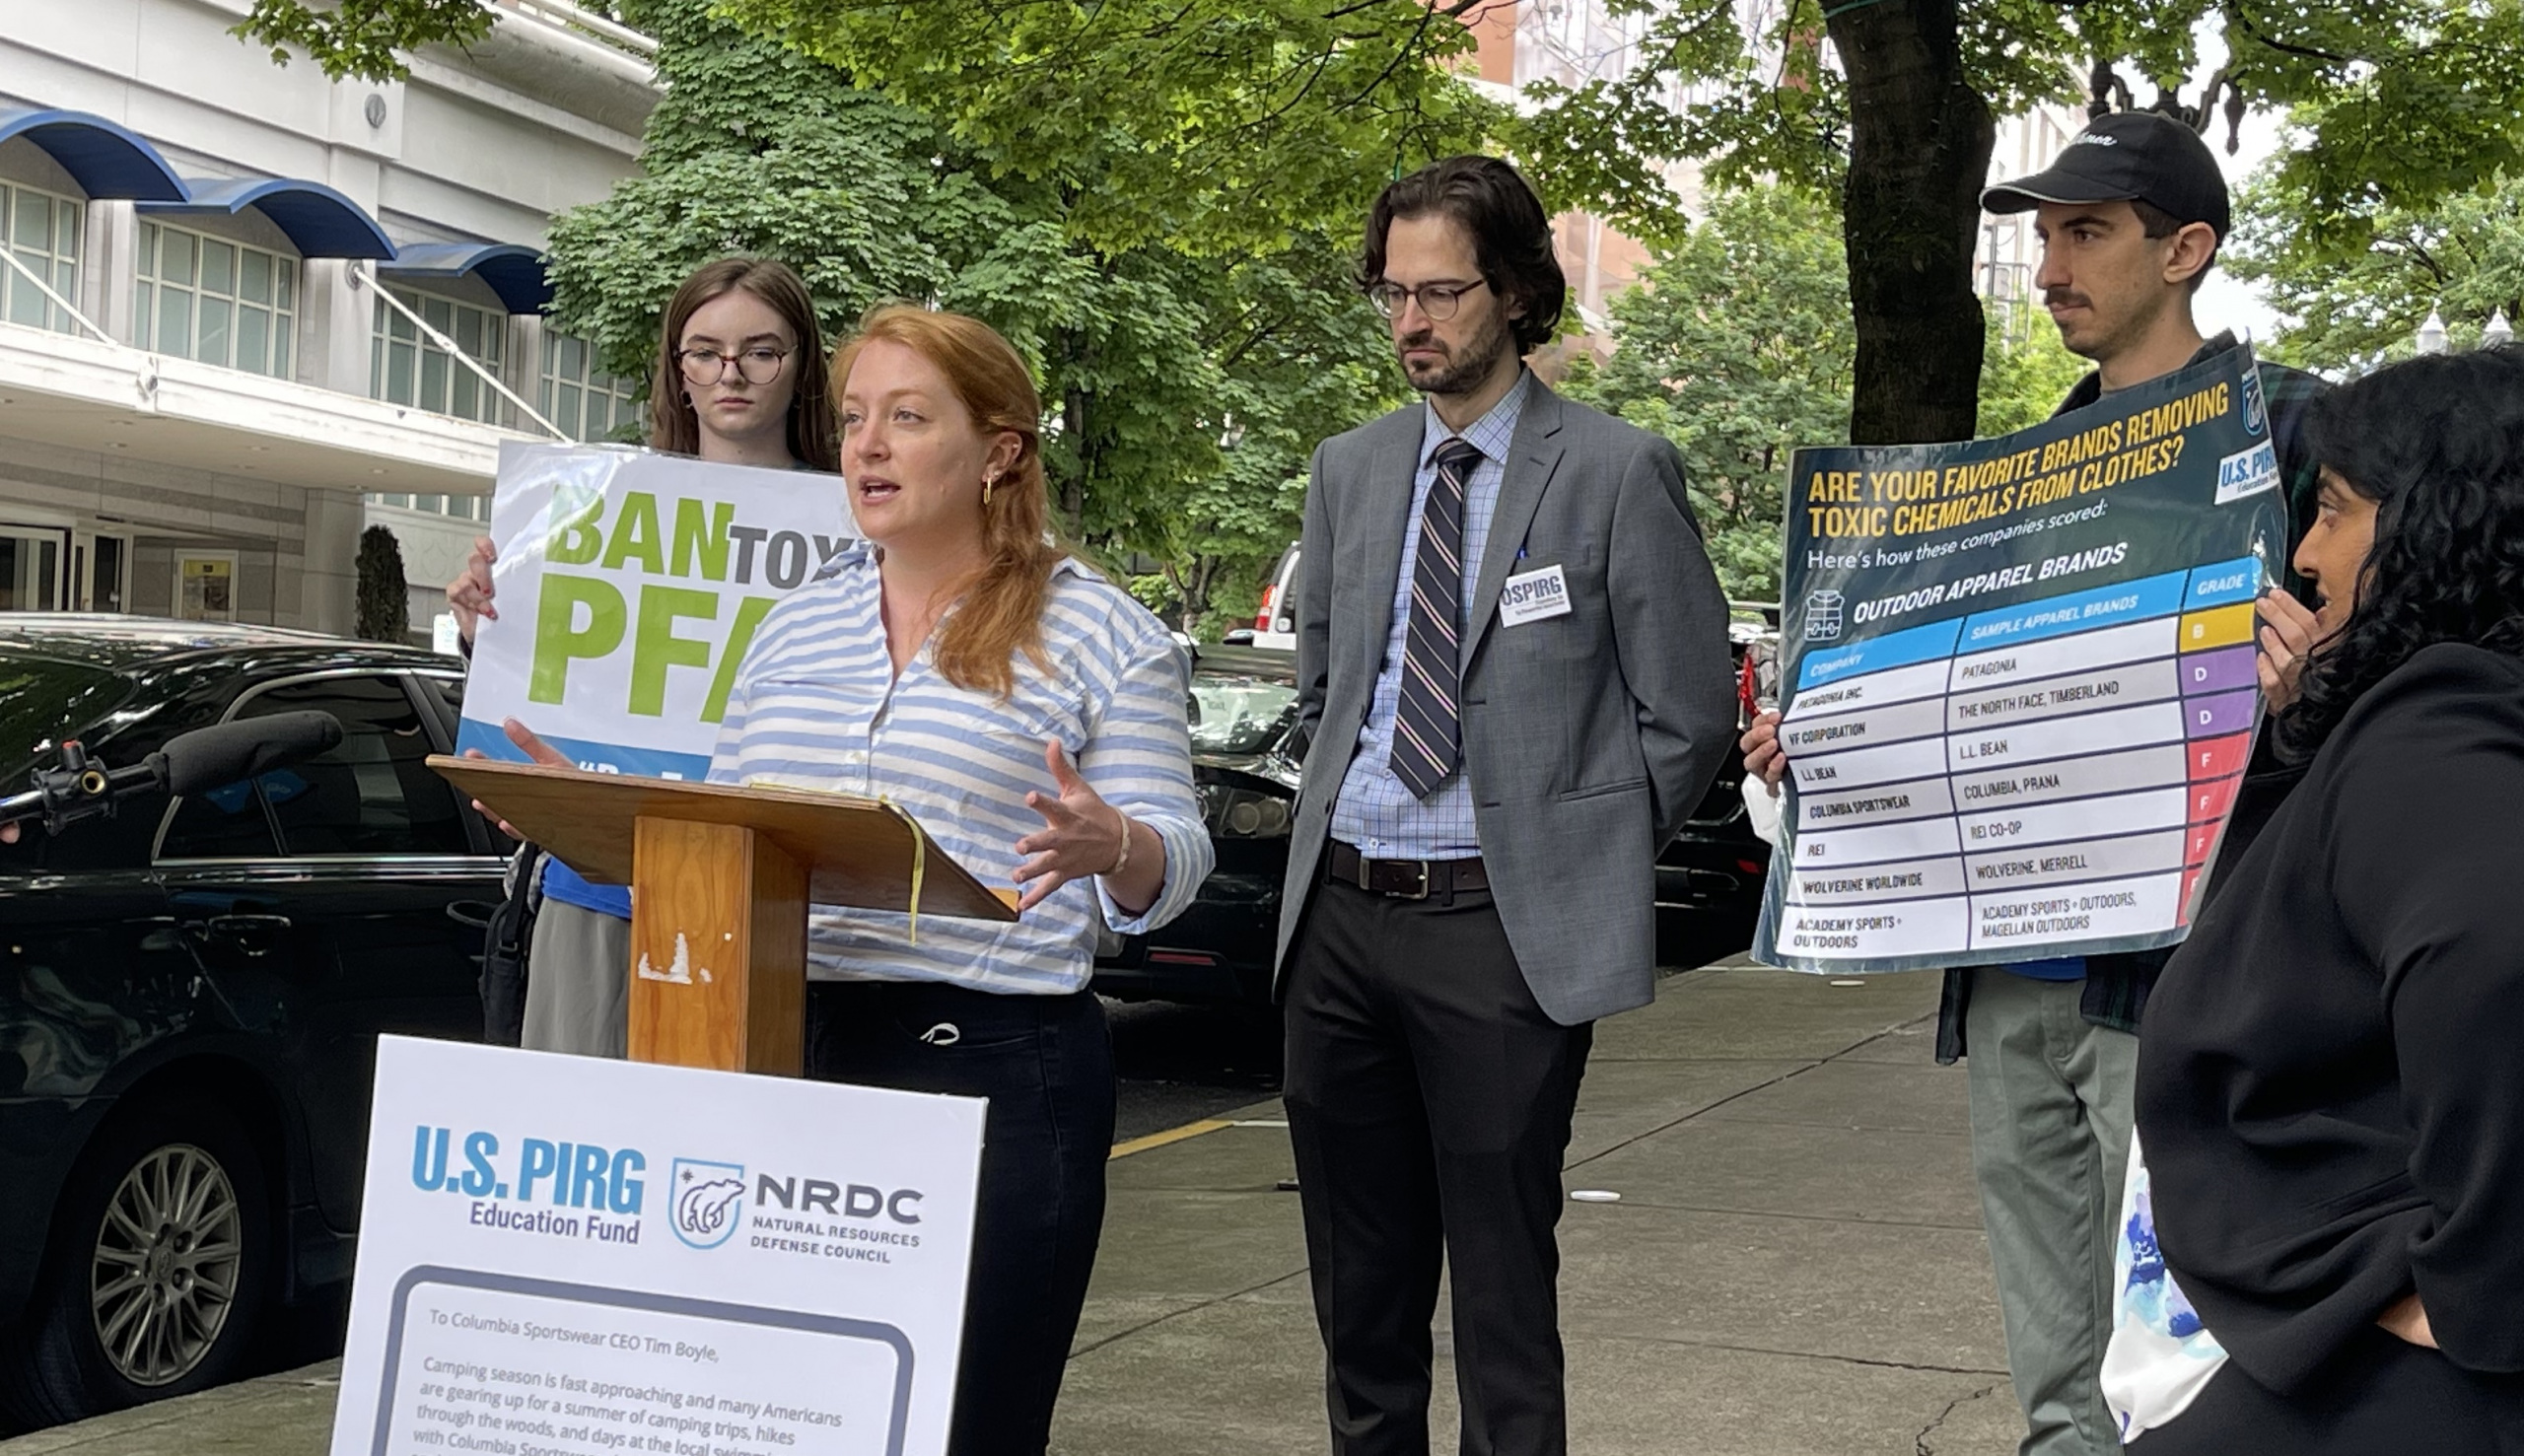 U.S. PIRG and NRDC deliver petitions to Columbia Sportswear